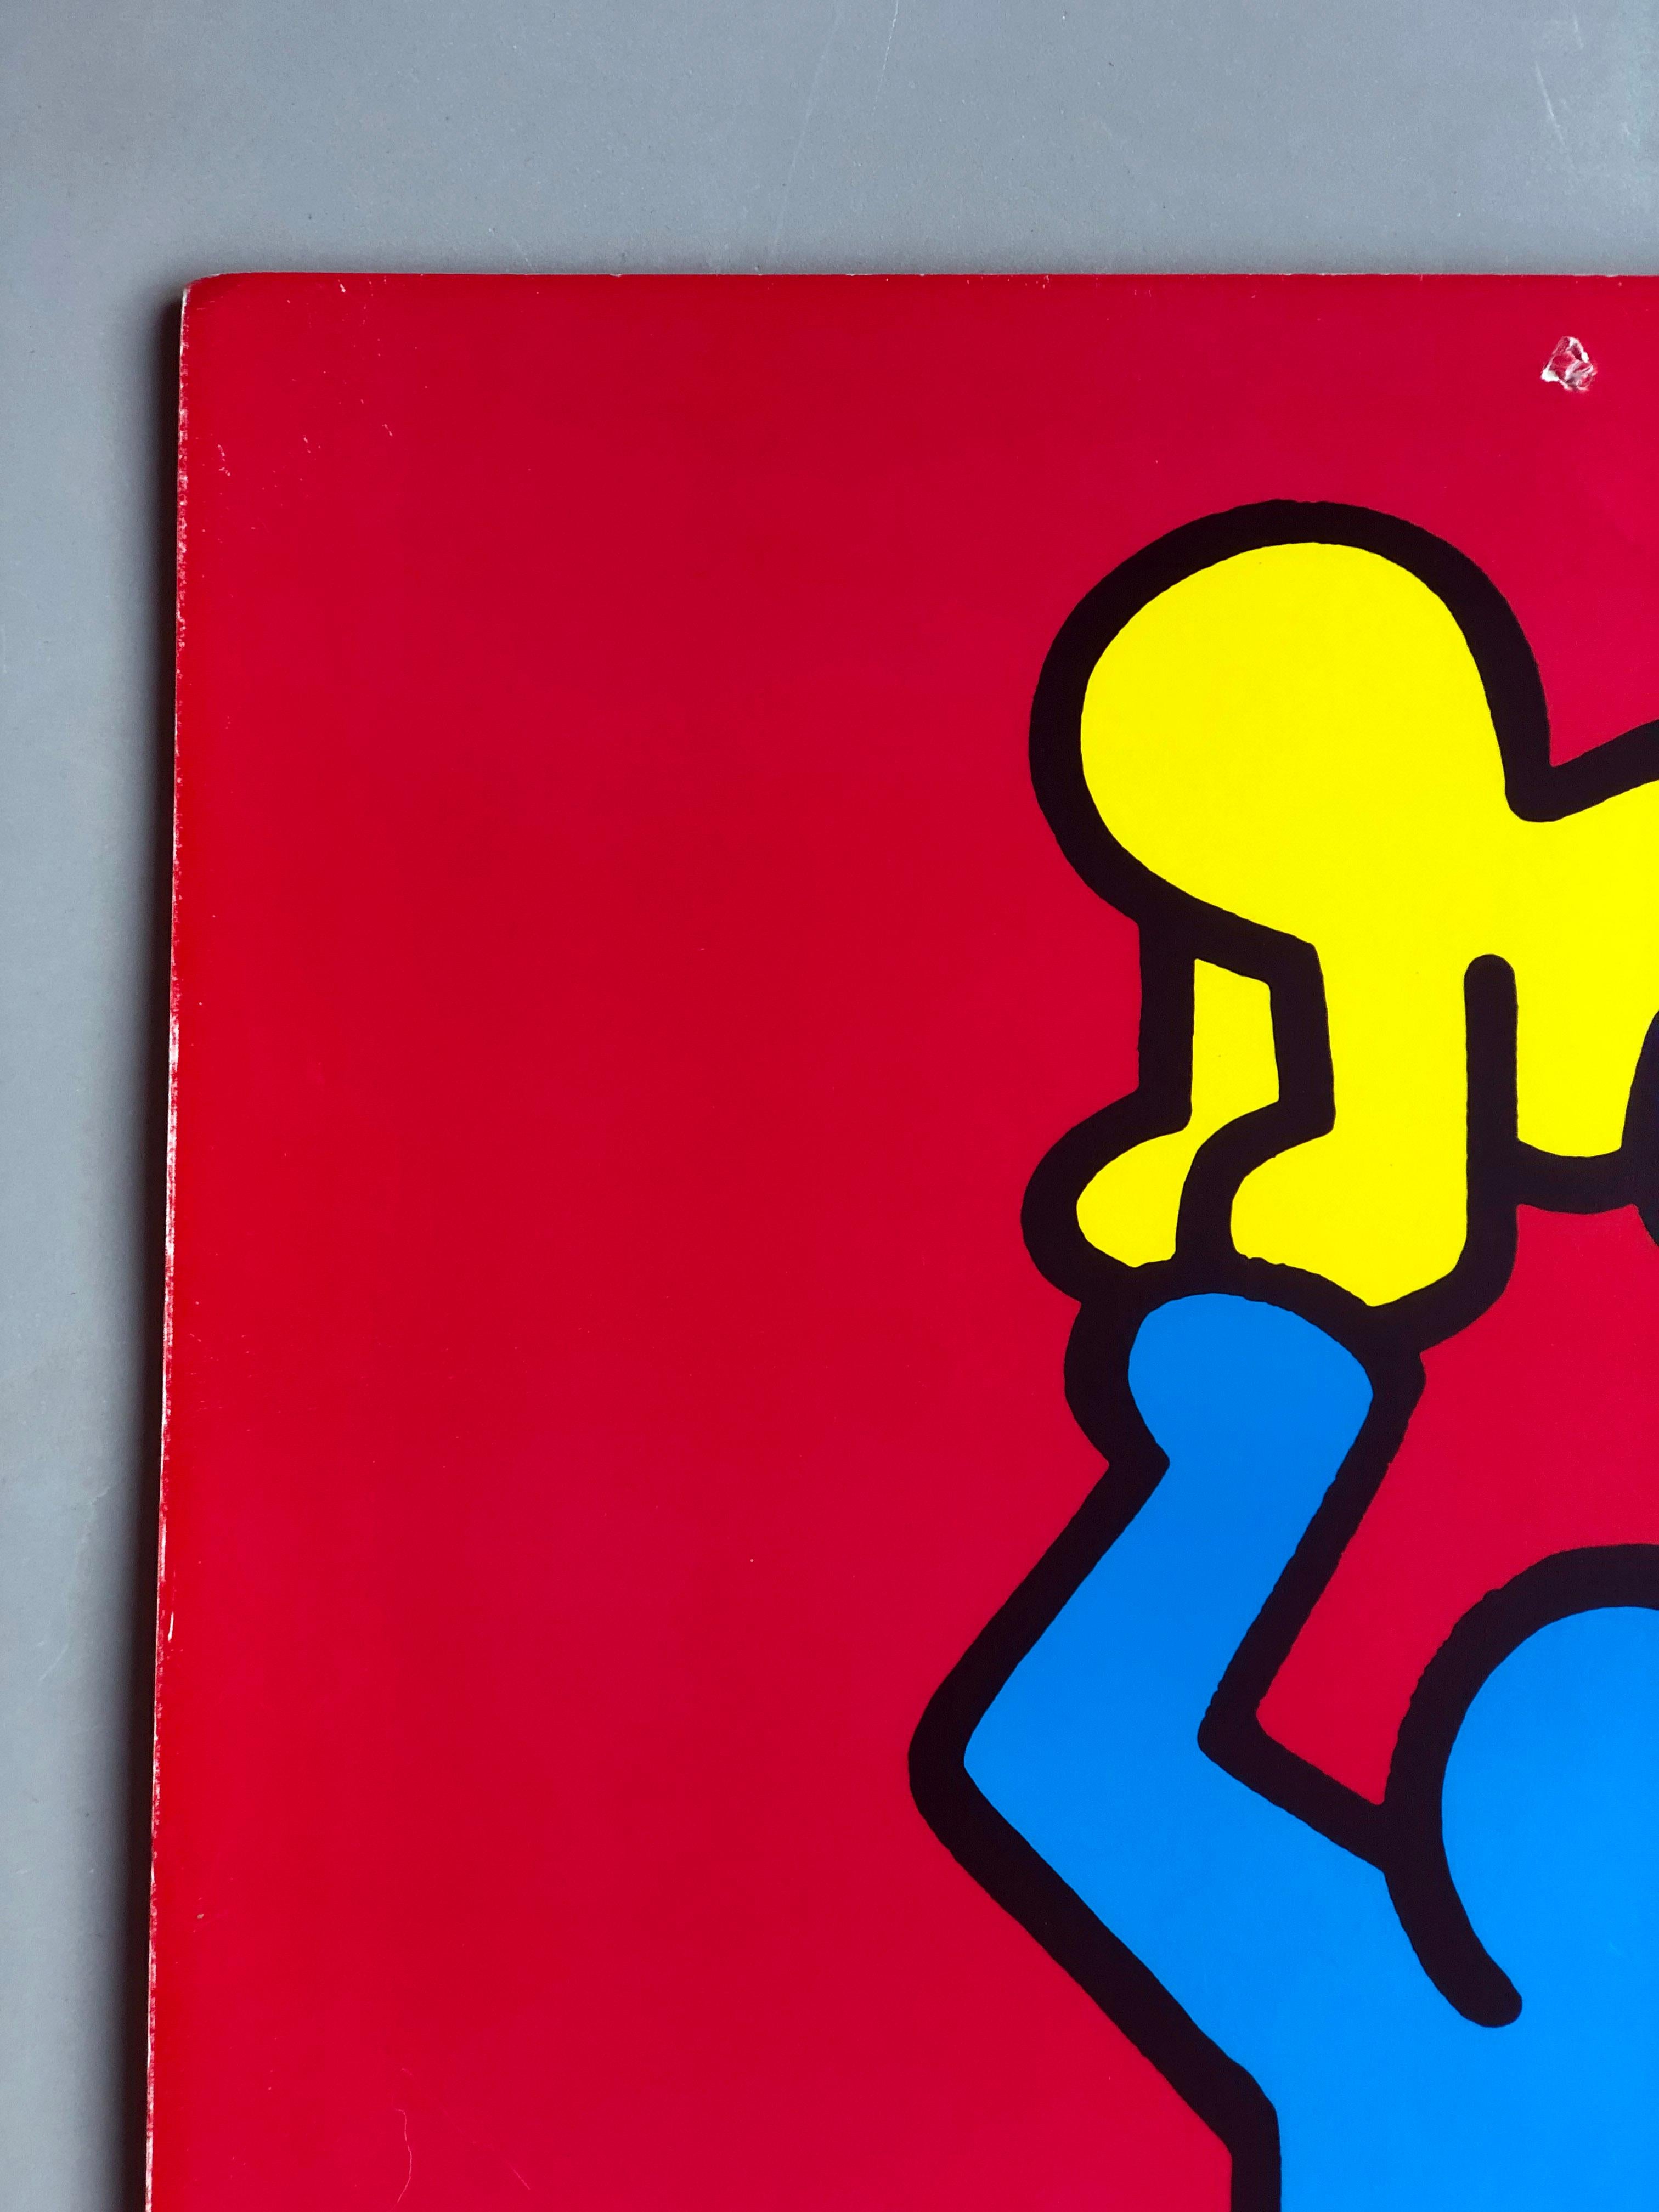 Paper Keith Haring 1991 - Man Holding Radiant Baby - Pop Art print on thick cardboard For Sale